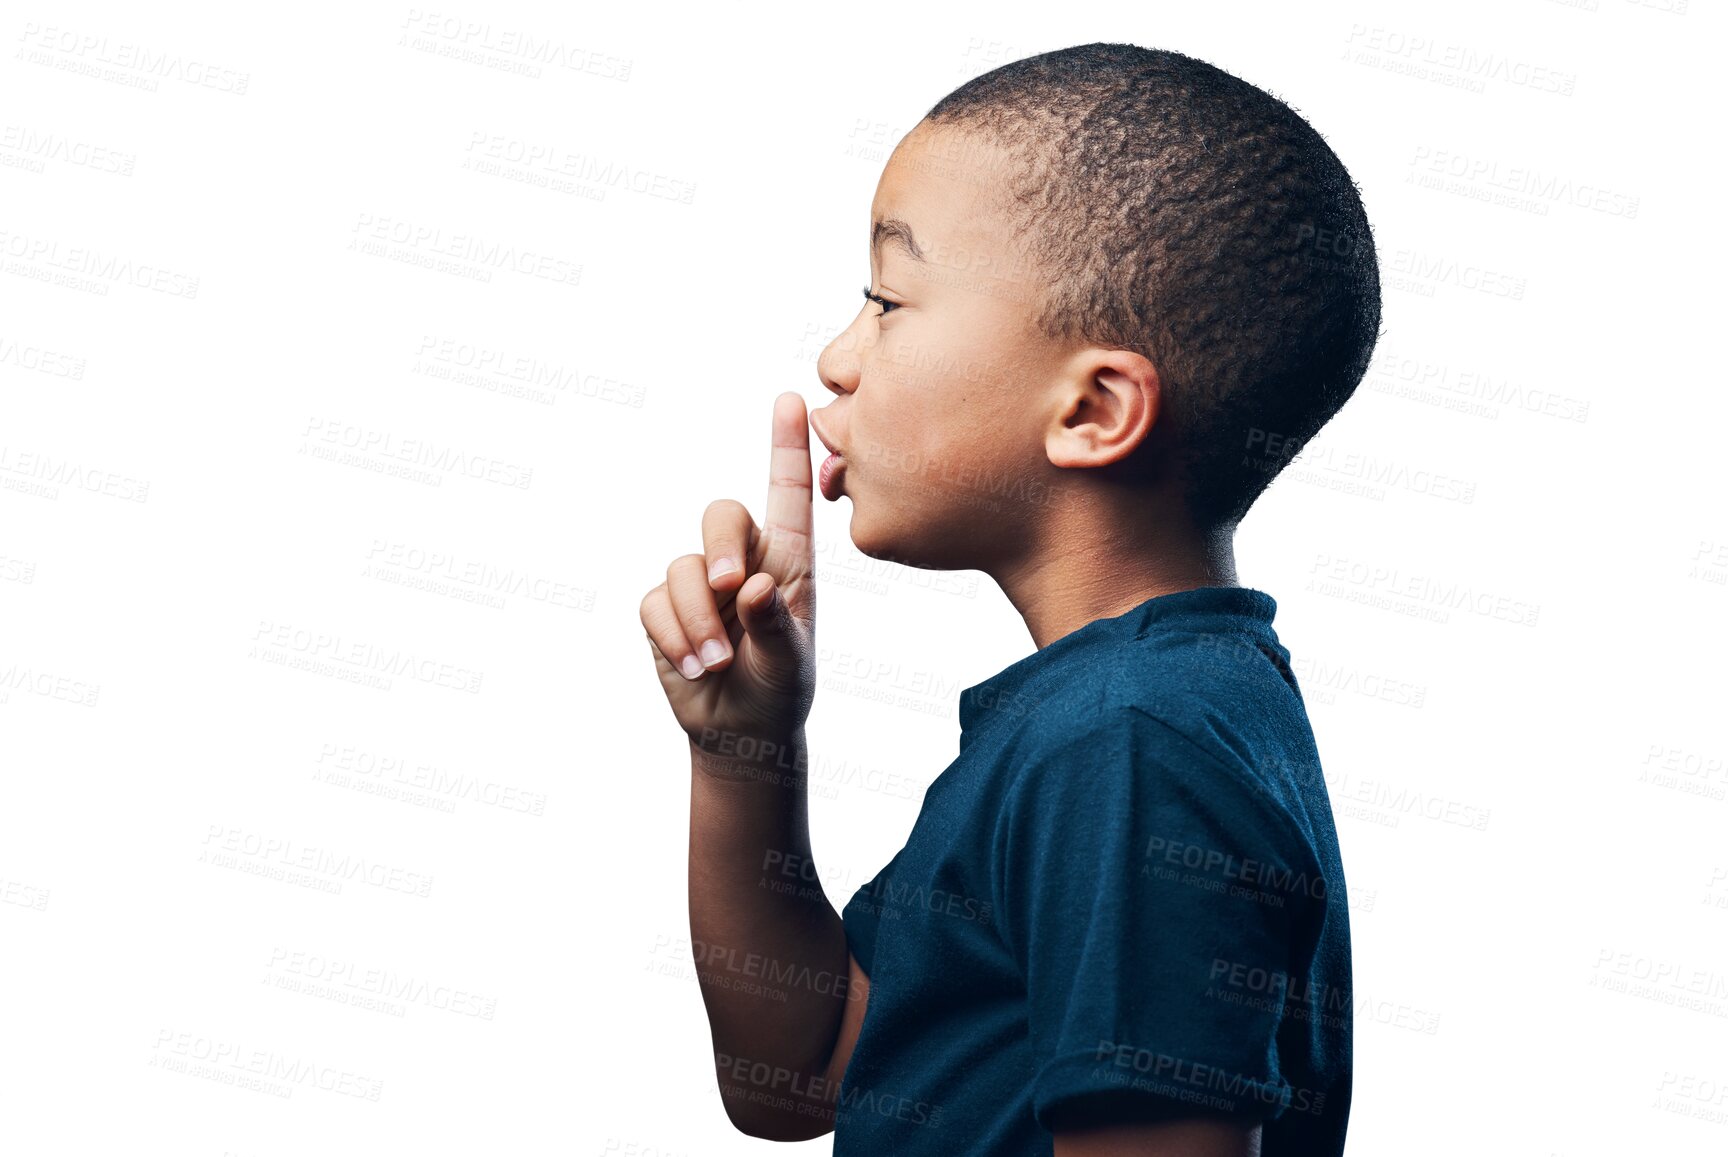 Buy stock photo Profile, boy and secret with finger to lips, silent emoji and hand gesture isolated on transparent png background. Quiet, mystery and whisper, hide news with shush and young male child with gossip